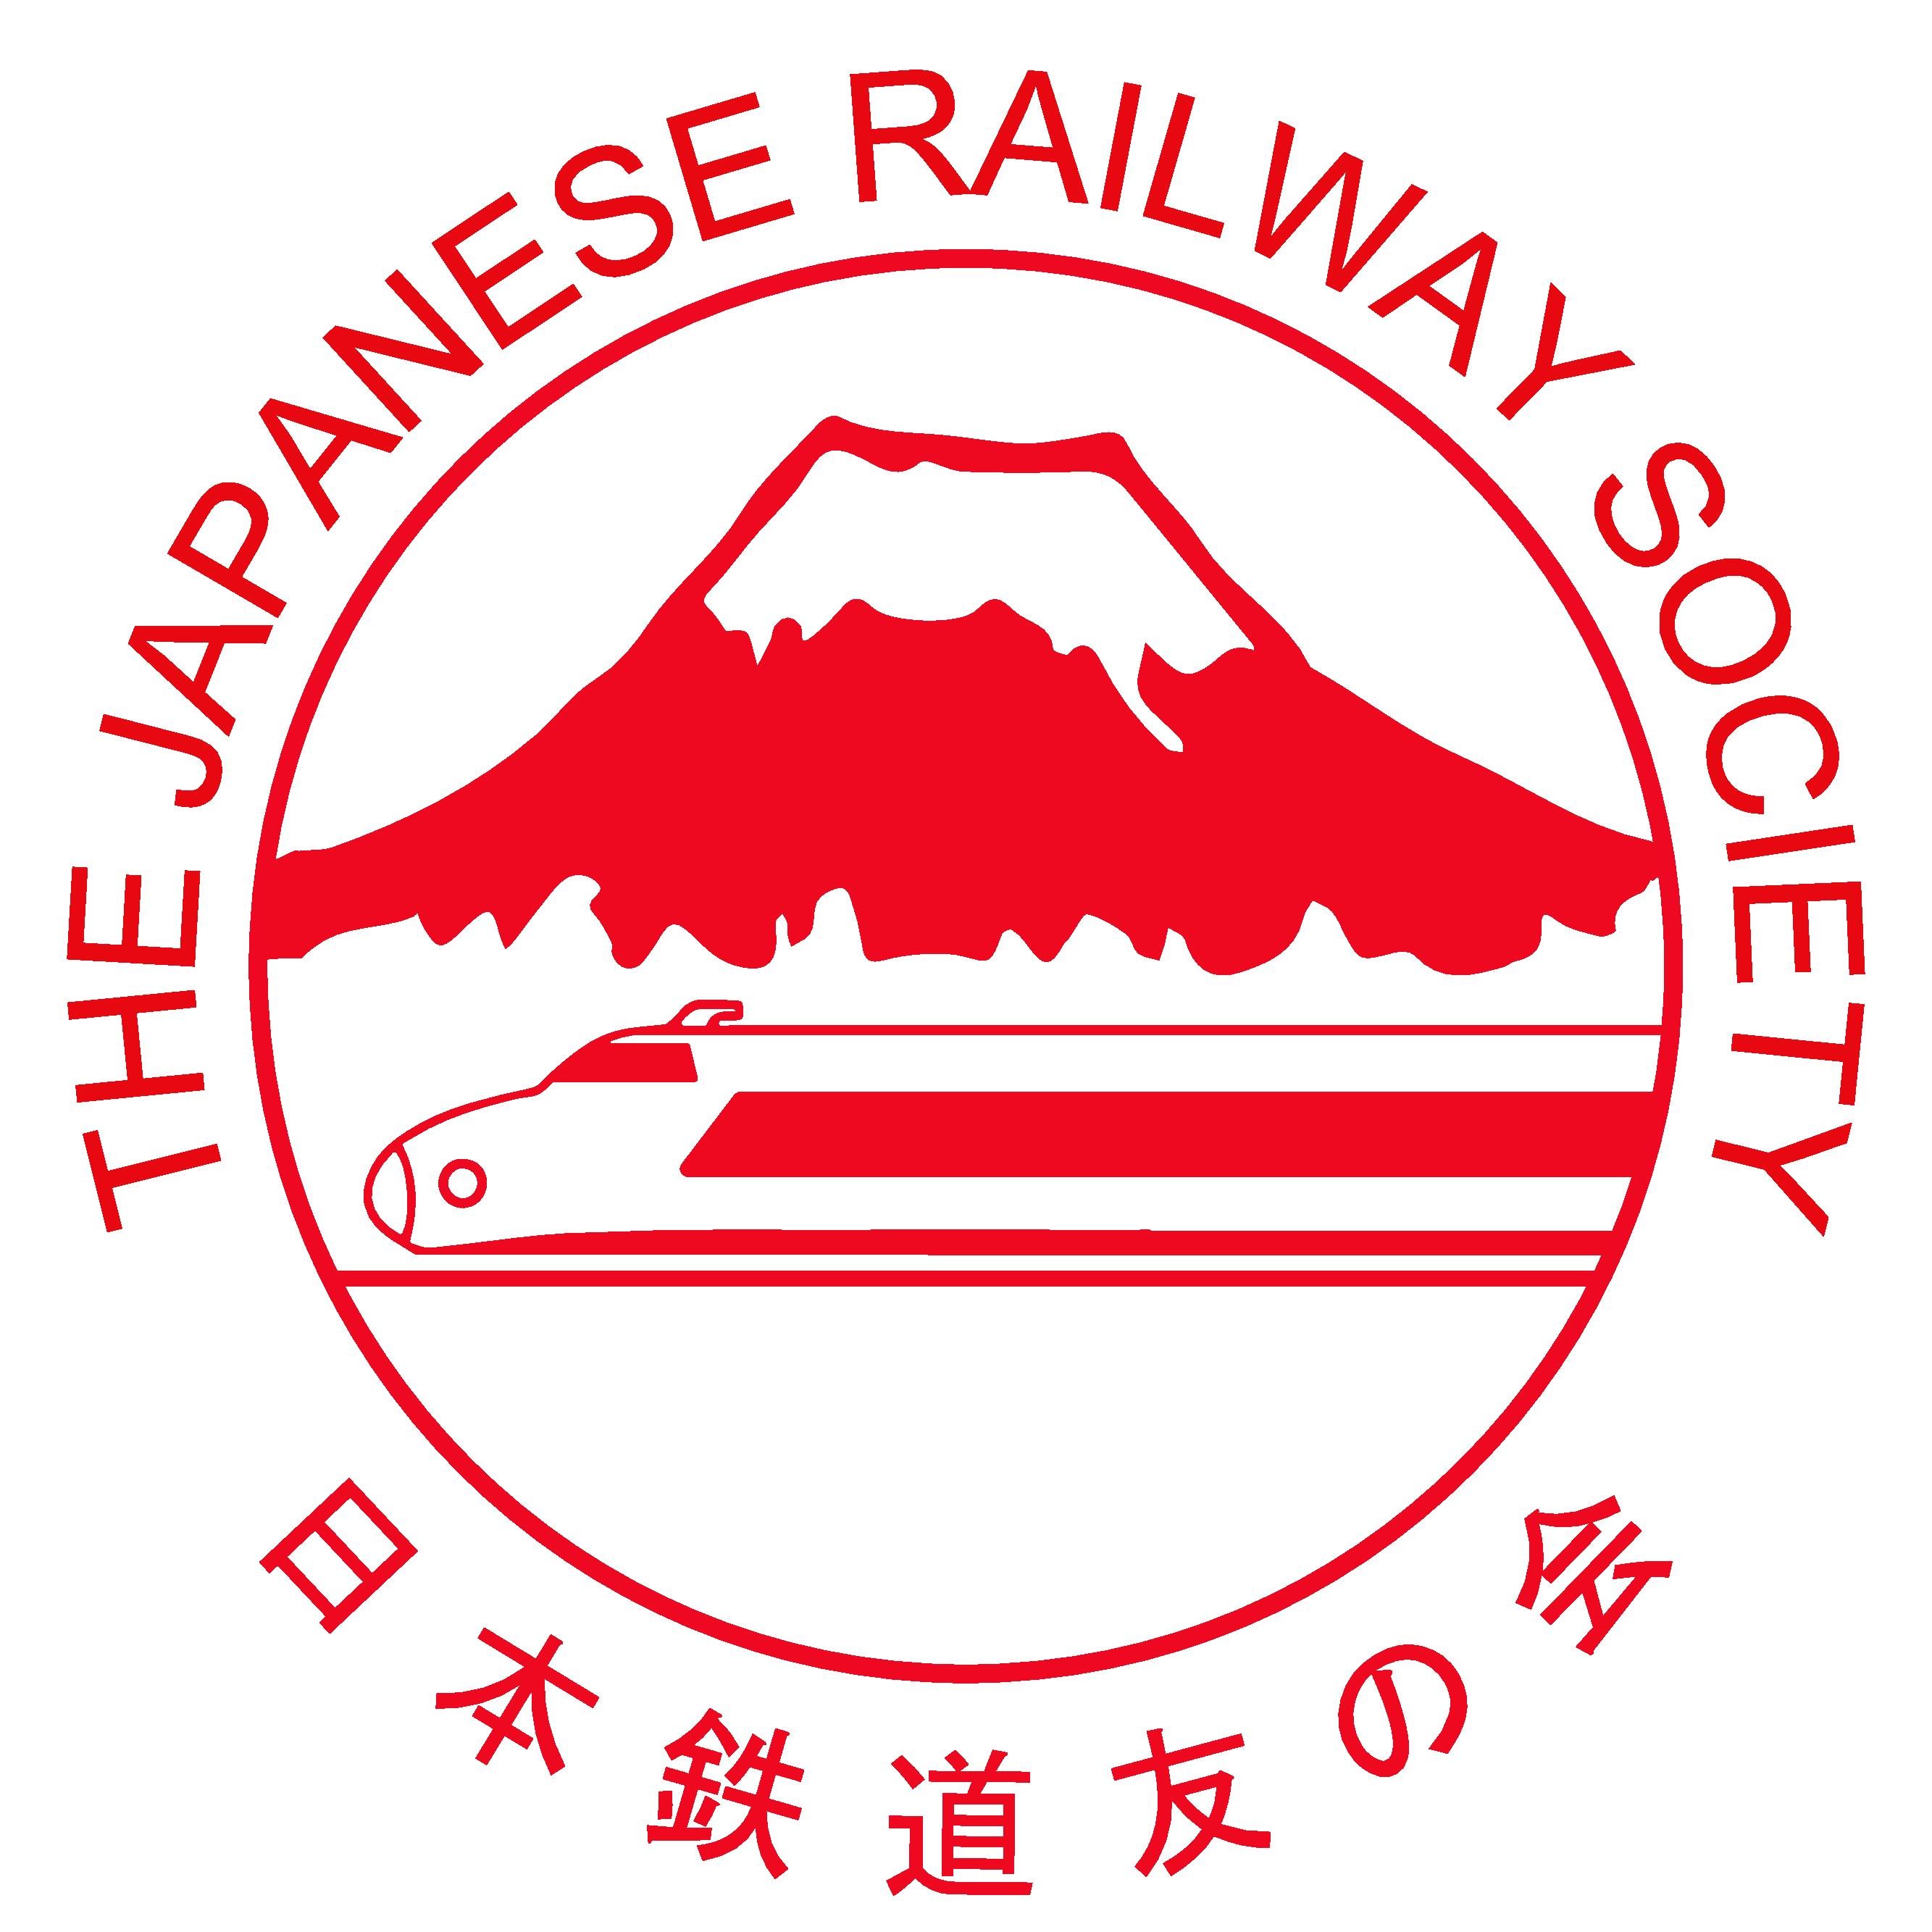 The Japanese Railway Society (JRS) was founded in 1991 in London to promote the railways of Japan in the UK & other non Japanese-speaking countries.